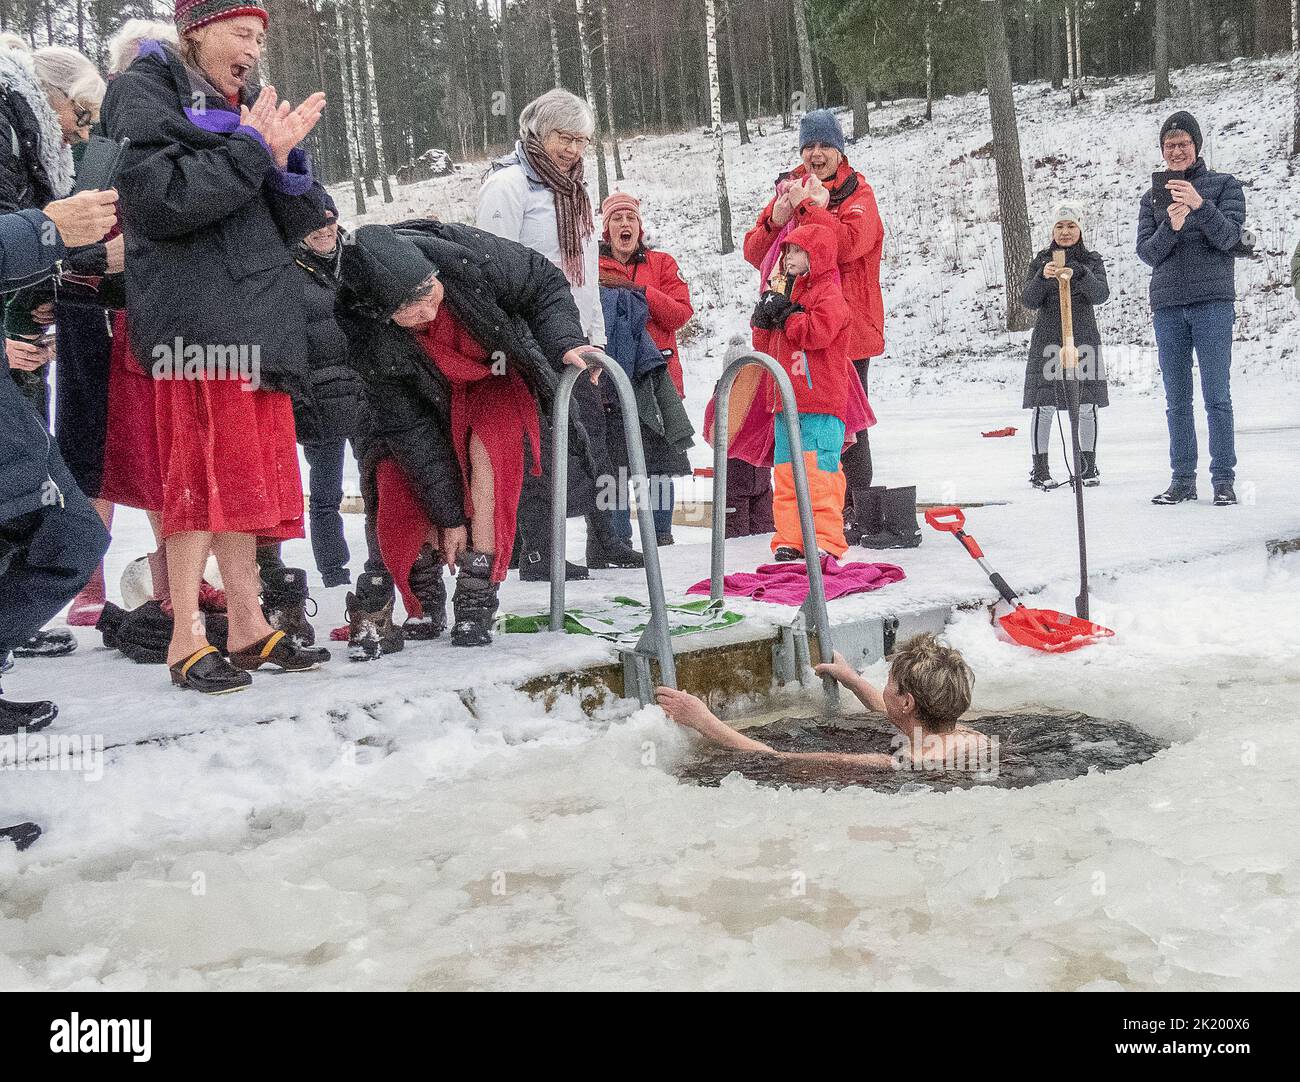 Woman swimmning in winter. Cold water, snow an people. photo: bo arrhed Stock Photo